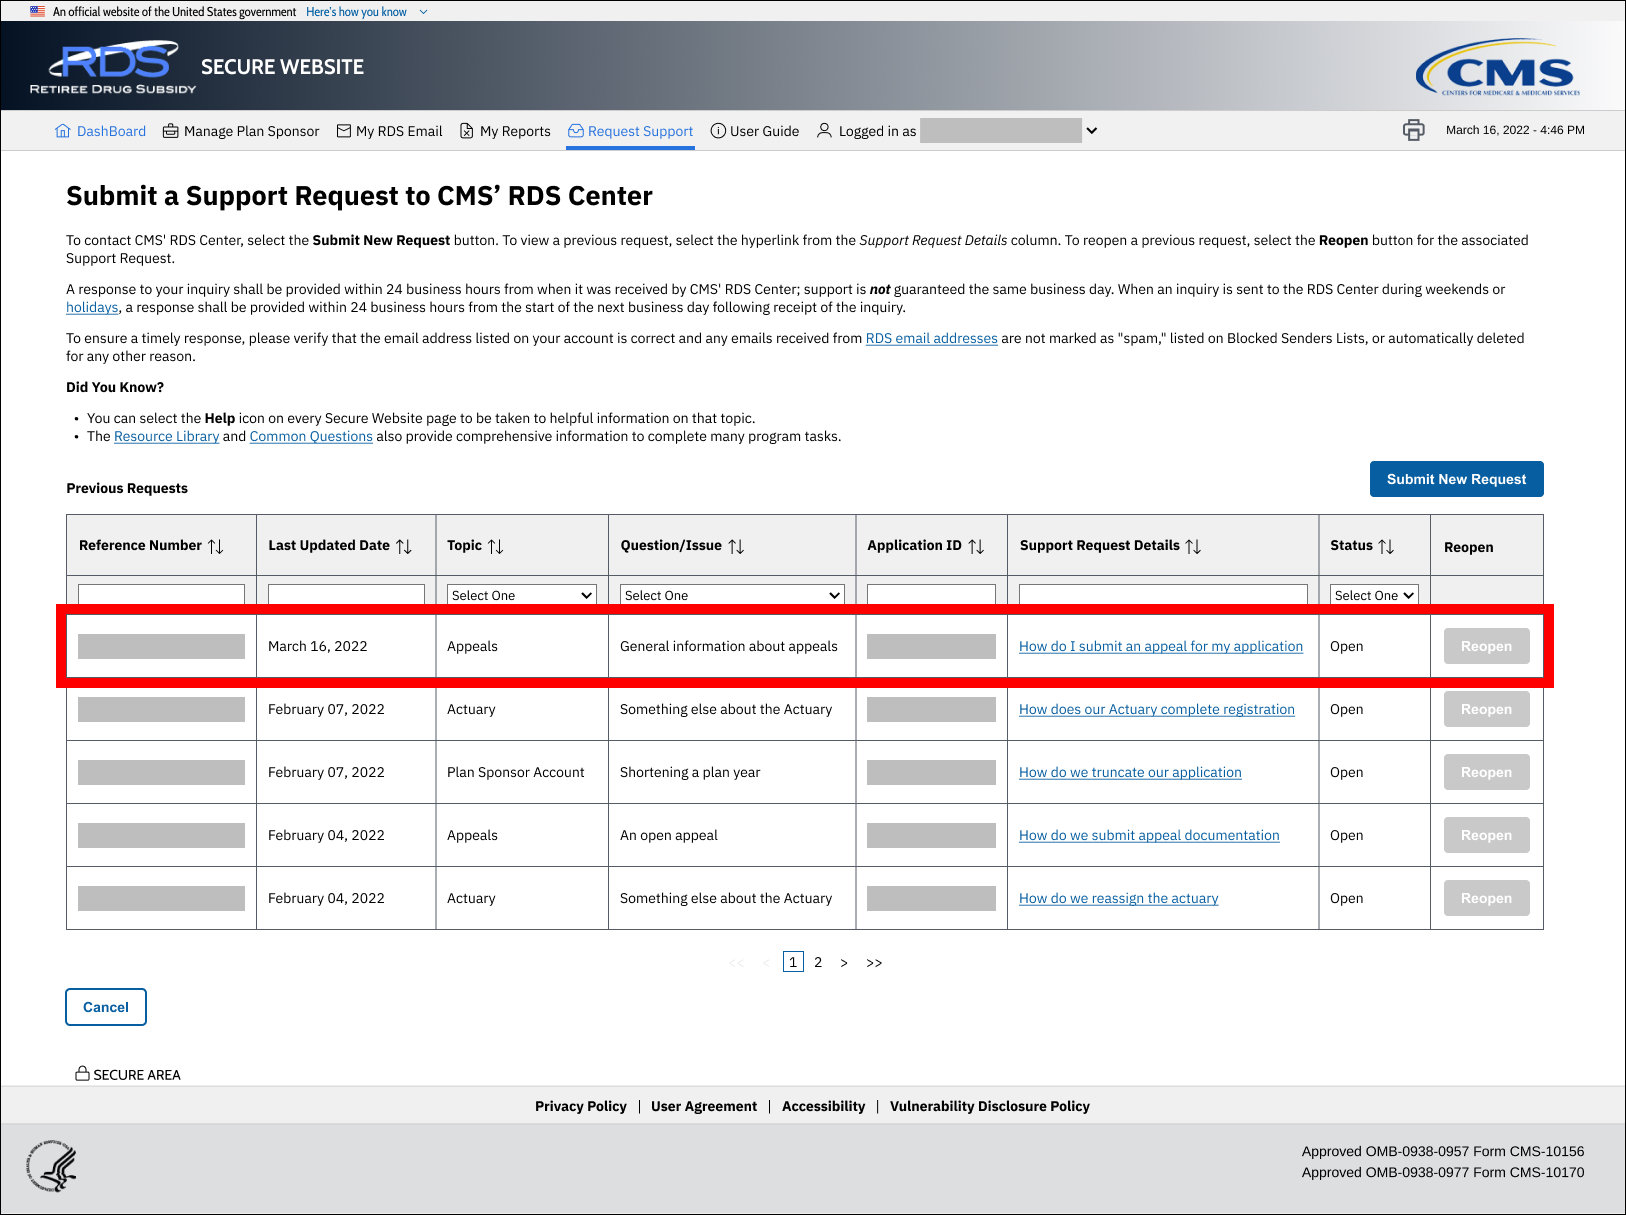 Submit a Support Request to CMS' RDS Center page with sample data. New row of Previous Requests table is highlighted.